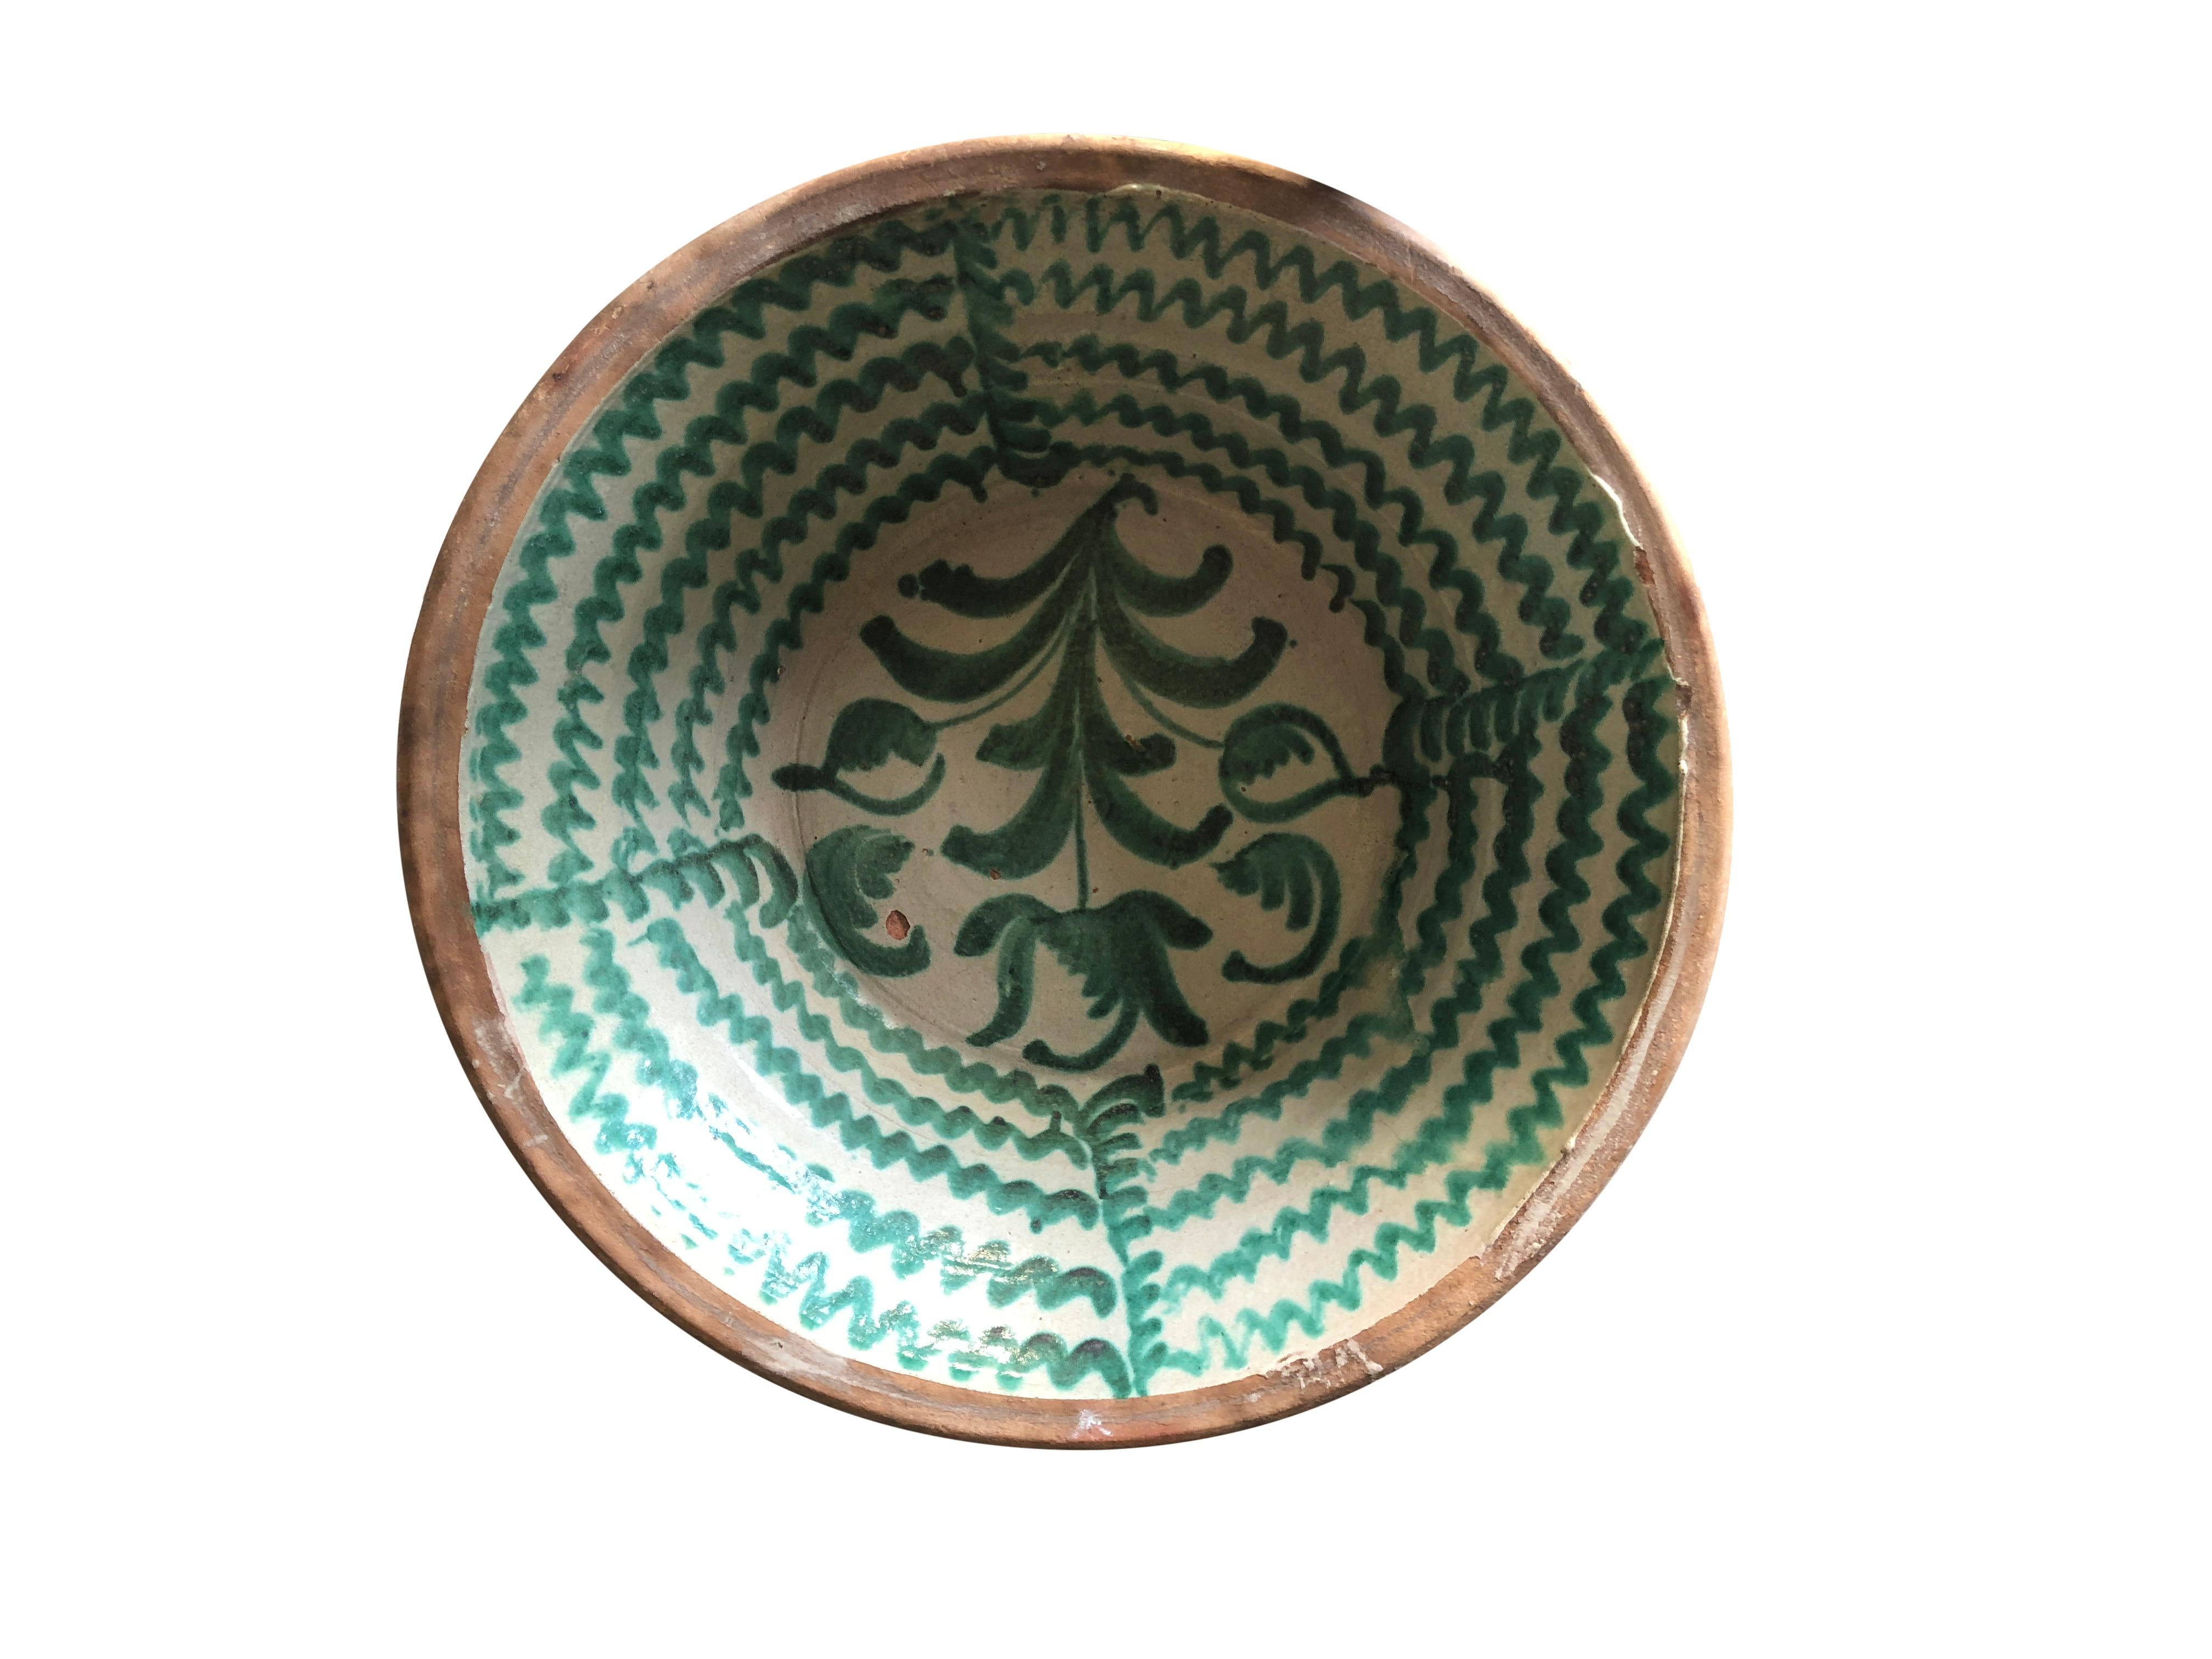 A large antique Spanish Lebrillo bowl in earthenware, made of handcrafted terracotta, in good condition. Featuring a glaze decoration in the typical Morisco green over a milk-white glaze. A large flower motif is painted to the base of the bowl